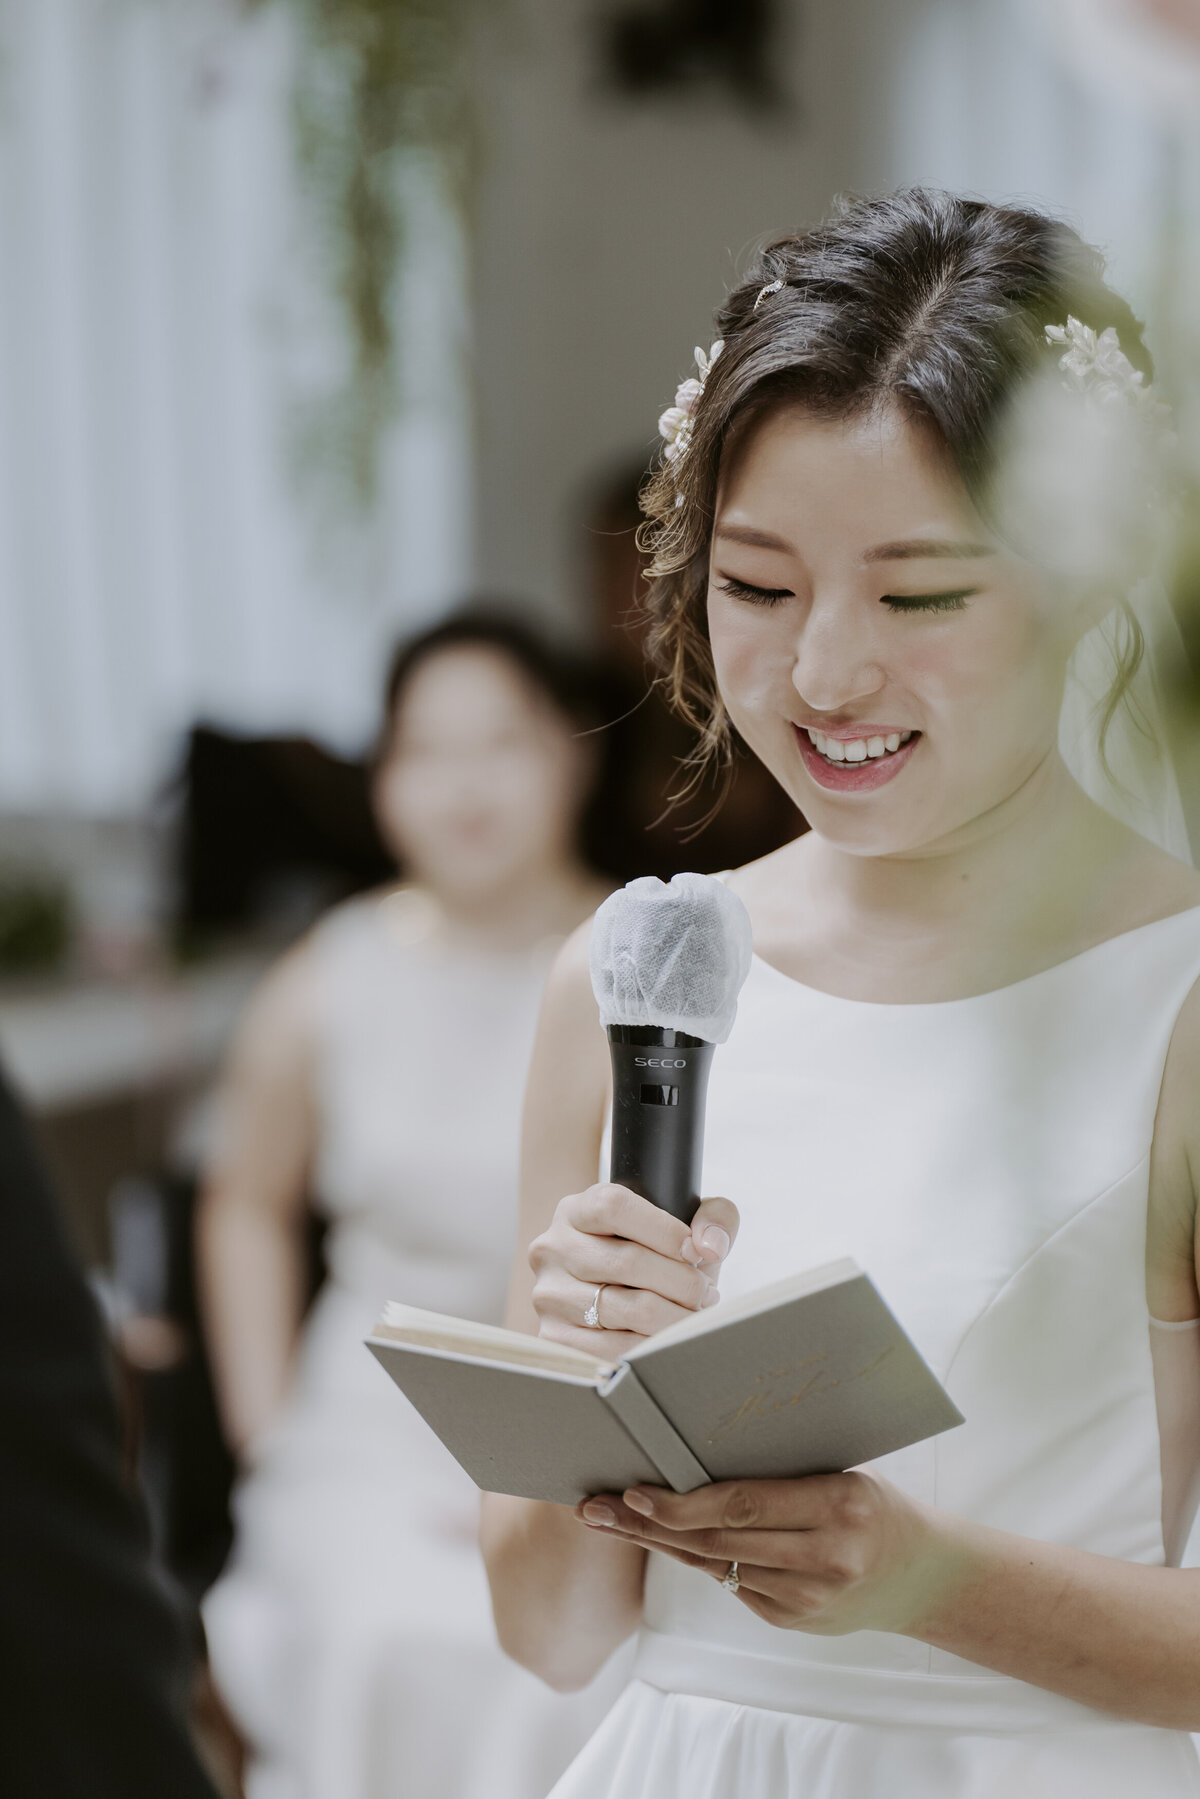 the bride reading her vow to the groom